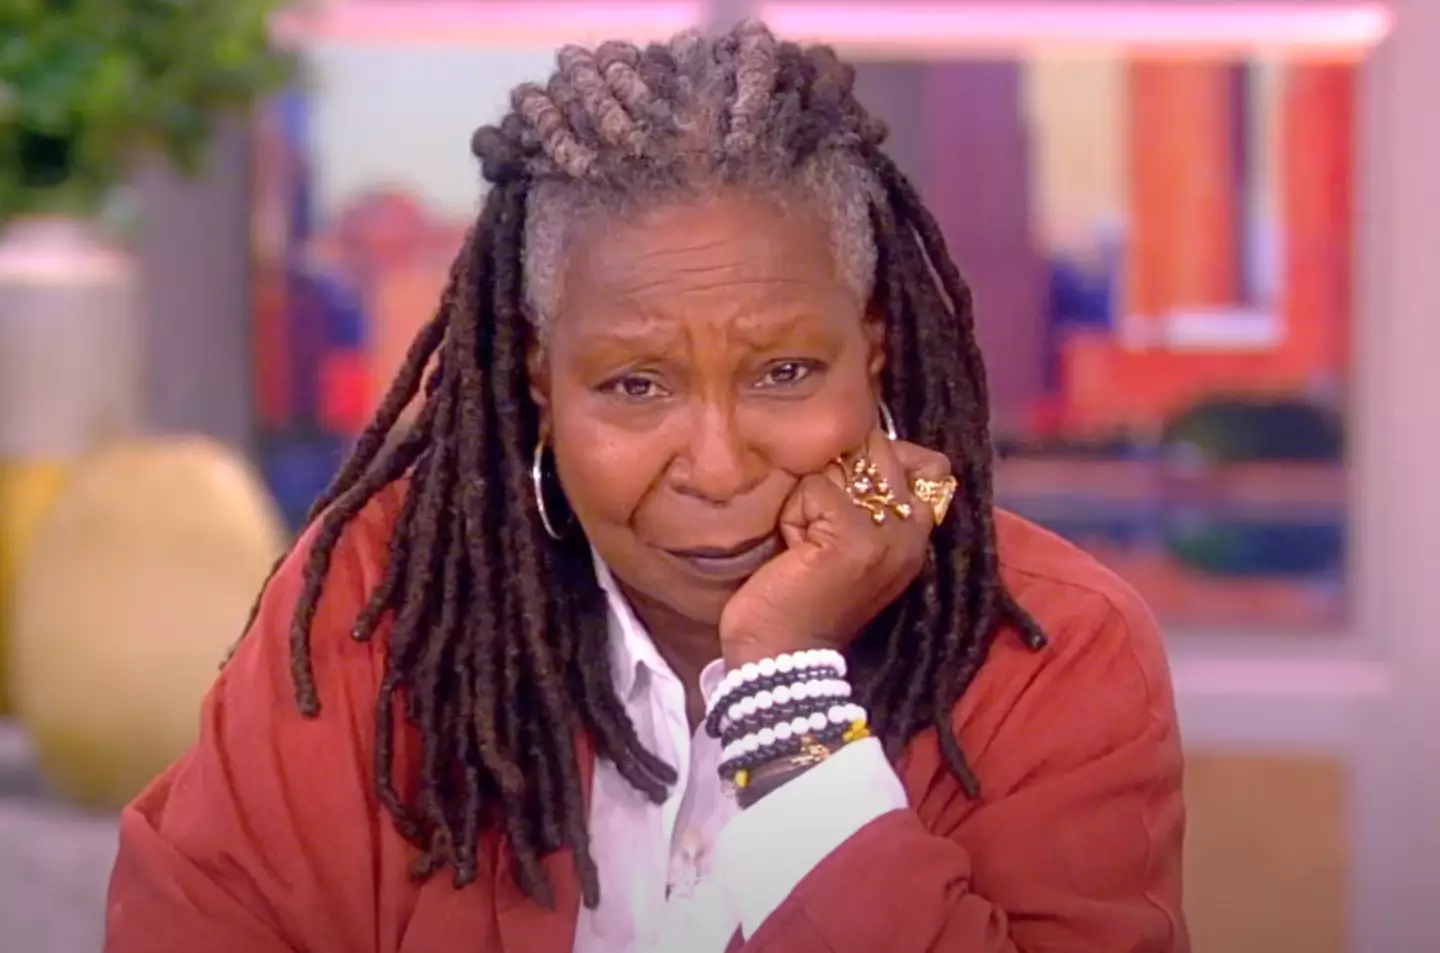 Whoopi Goldberg wasn't overly impressed with Bilson's comments.